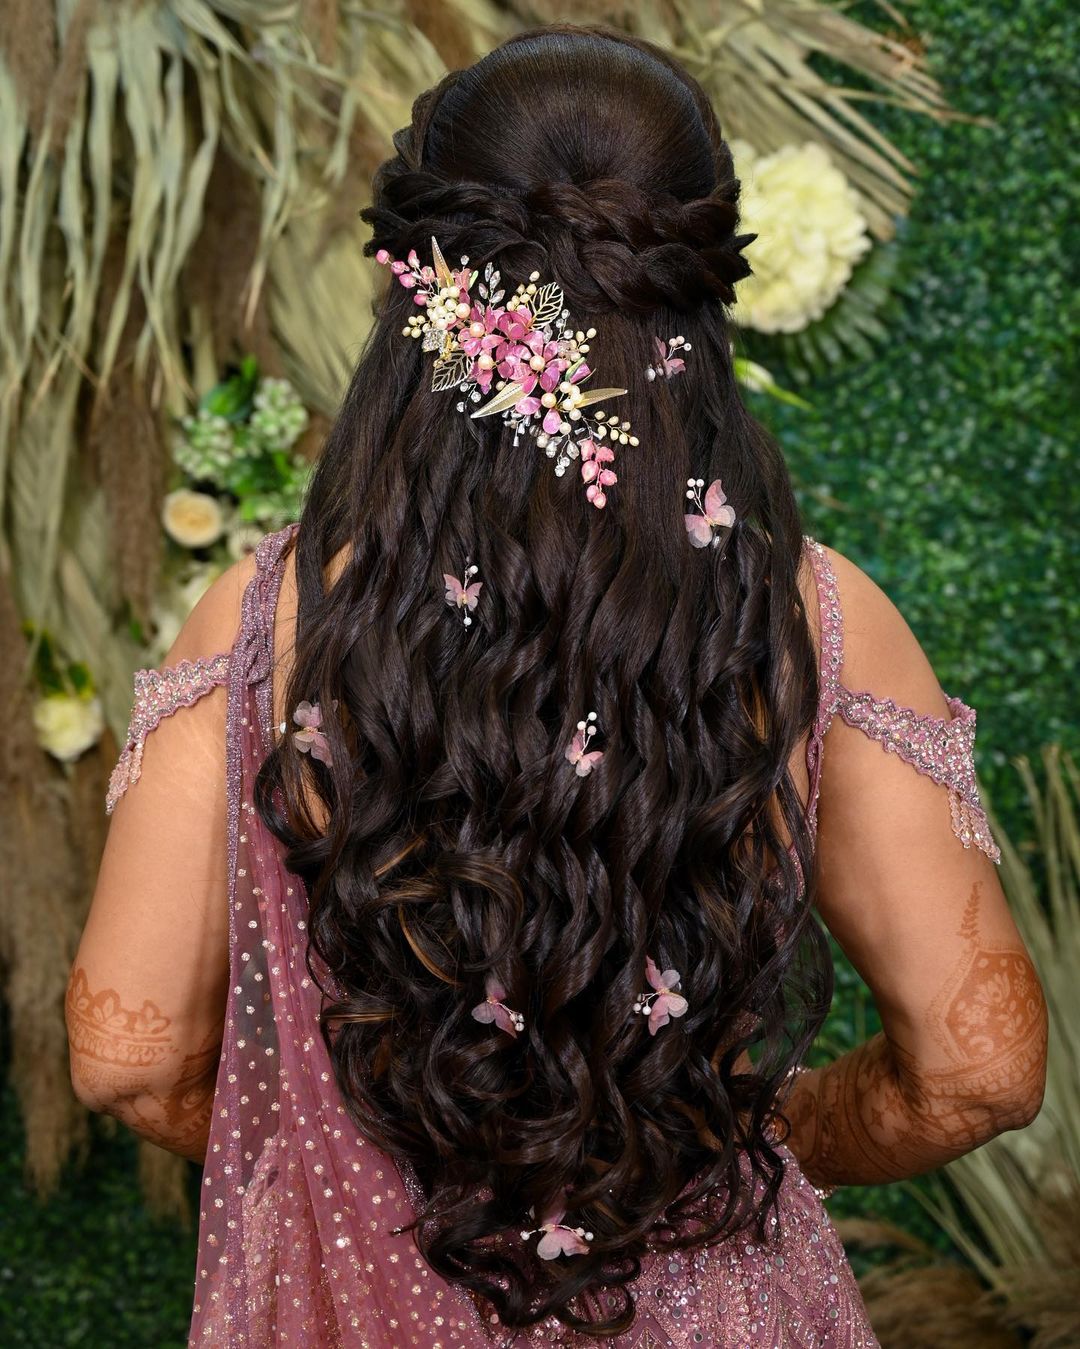 13 Engagement Hairstyle Ideas To Get The Perfect Wedding Look